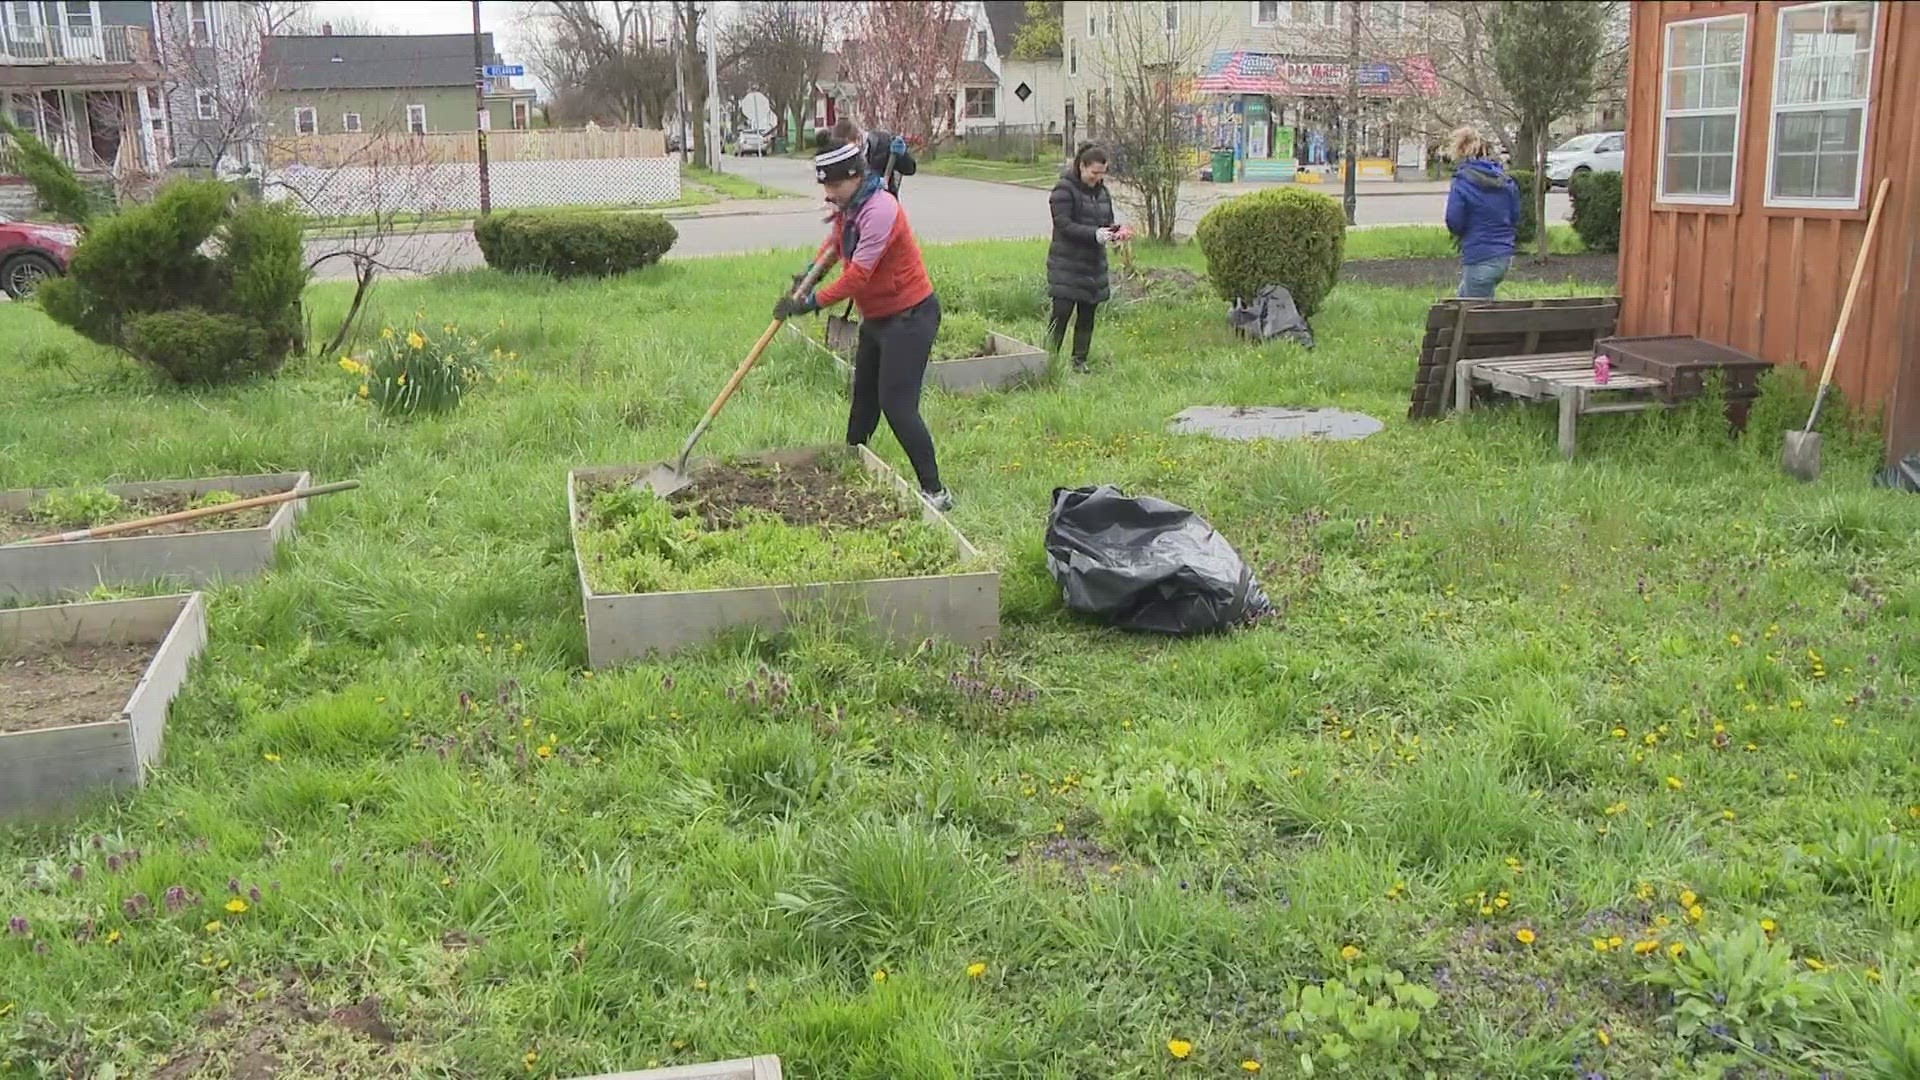 Volunteers are working to regenerate a garden on East Delevan Avenue. Groundwork Buffalo also allows kids to help with the planting.